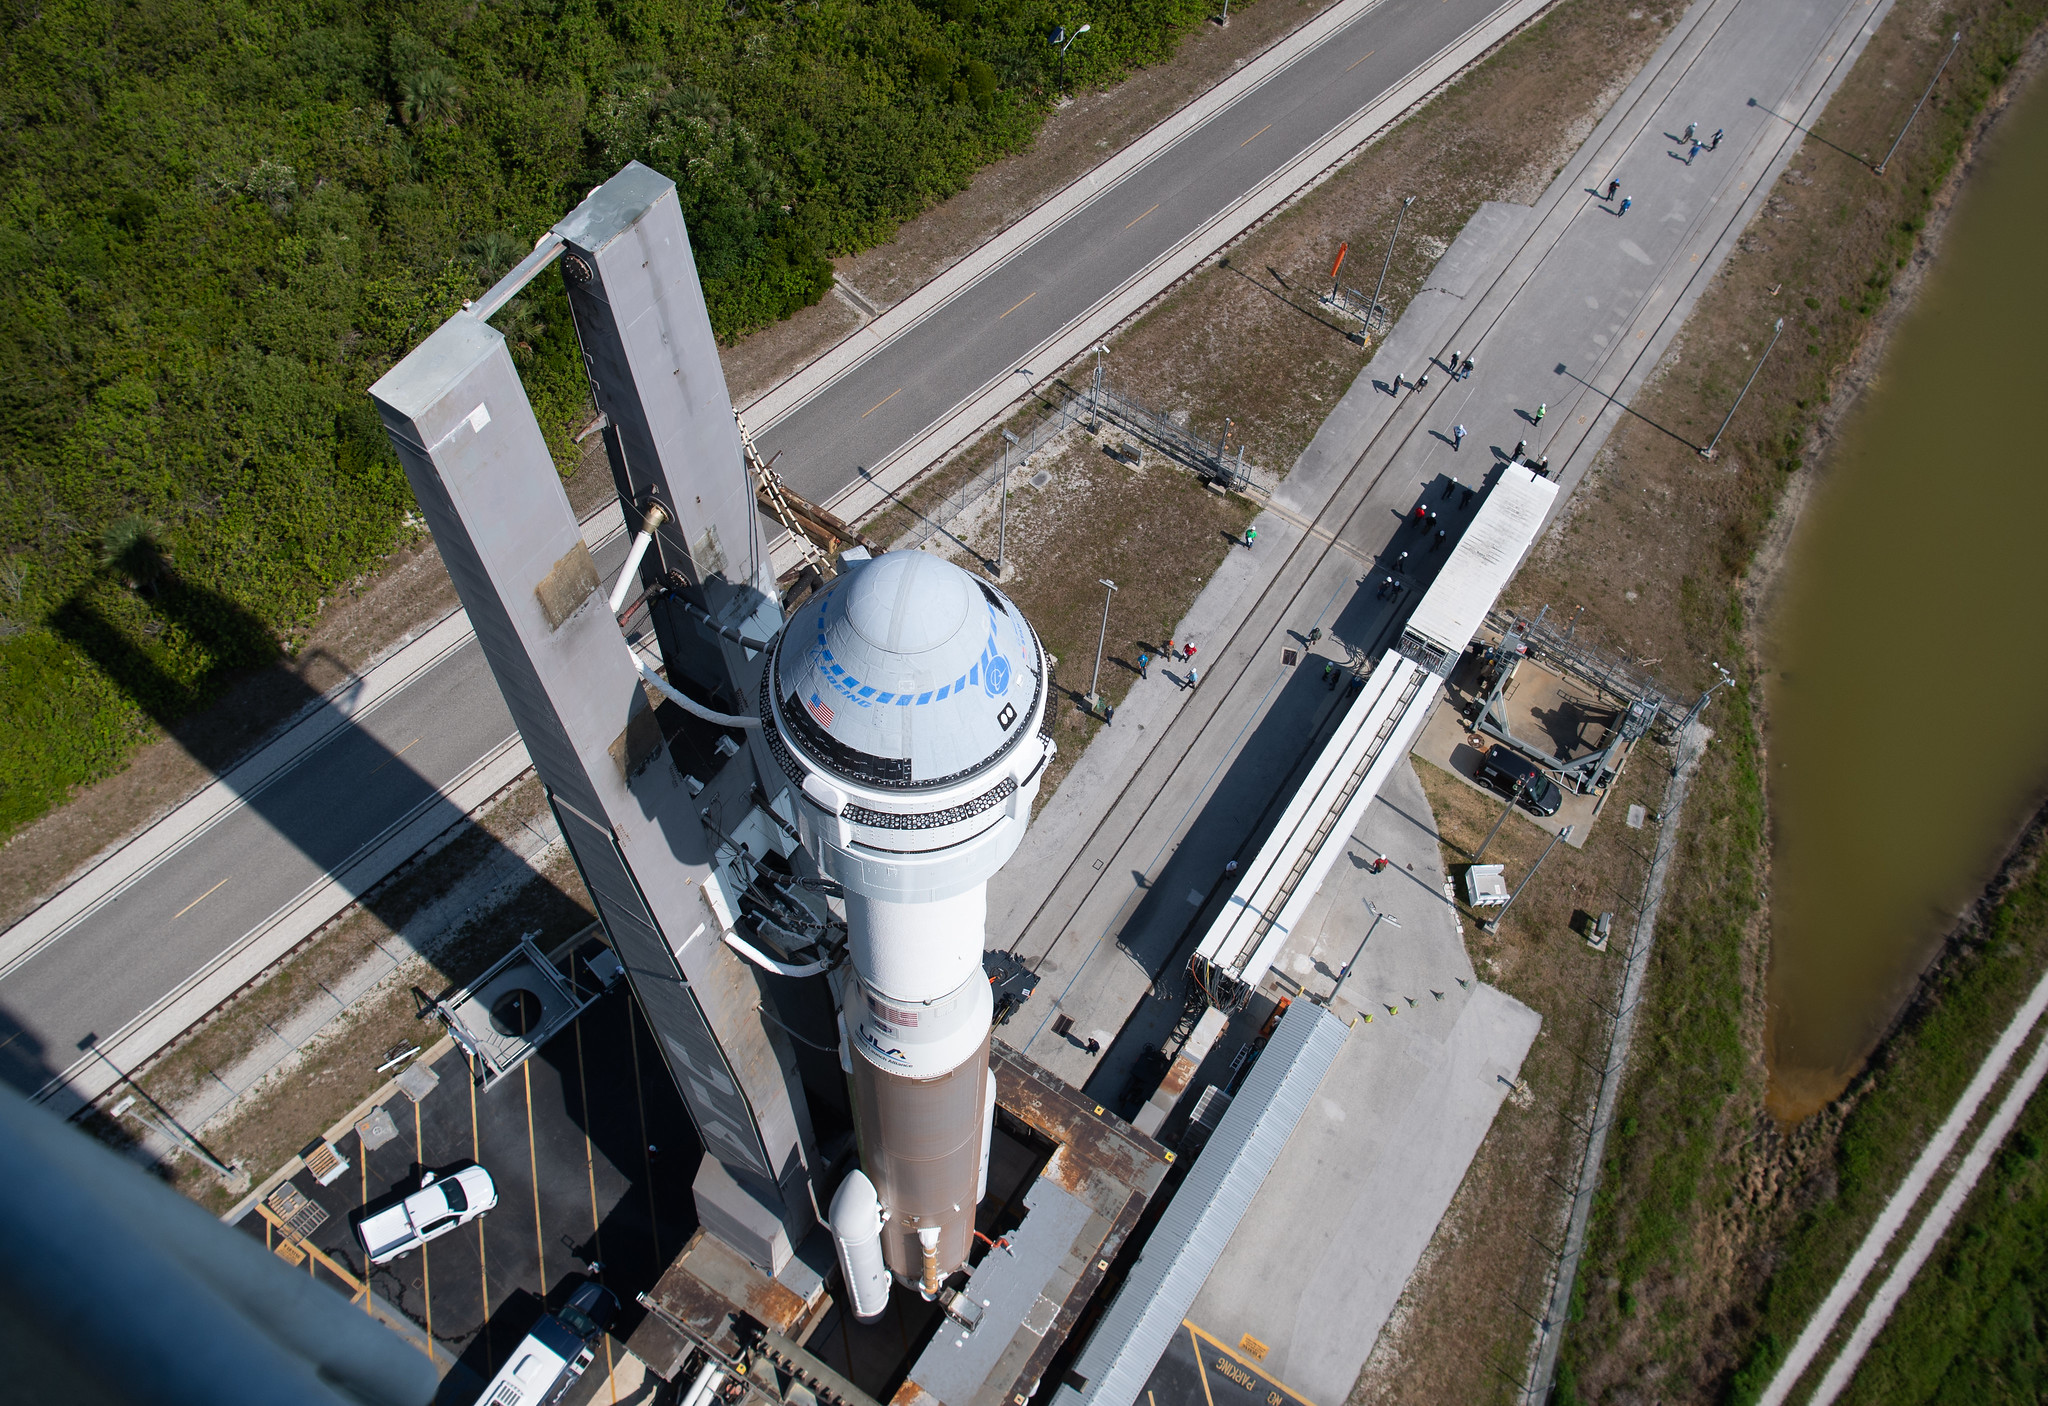 Boeing's Starliner OFT-2 spacecraft and its Atlas V rocket taxi to the launch pad on May 18, 2022.